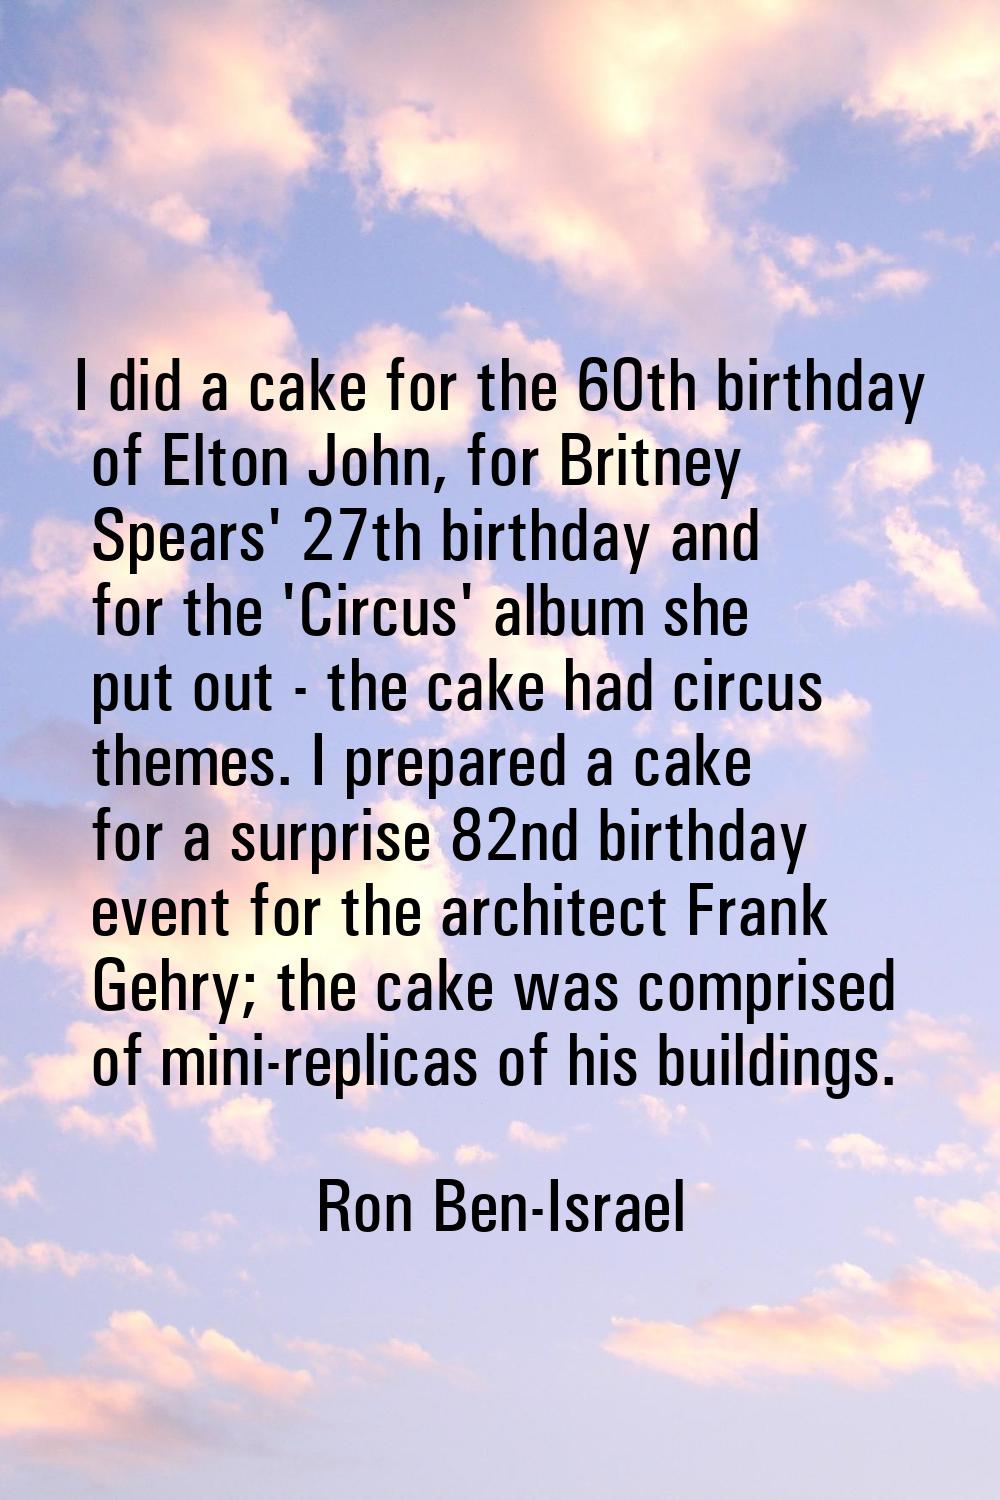 I did a cake for the 60th birthday of Elton John, for Britney Spears' 27th birthday and for the 'Ci